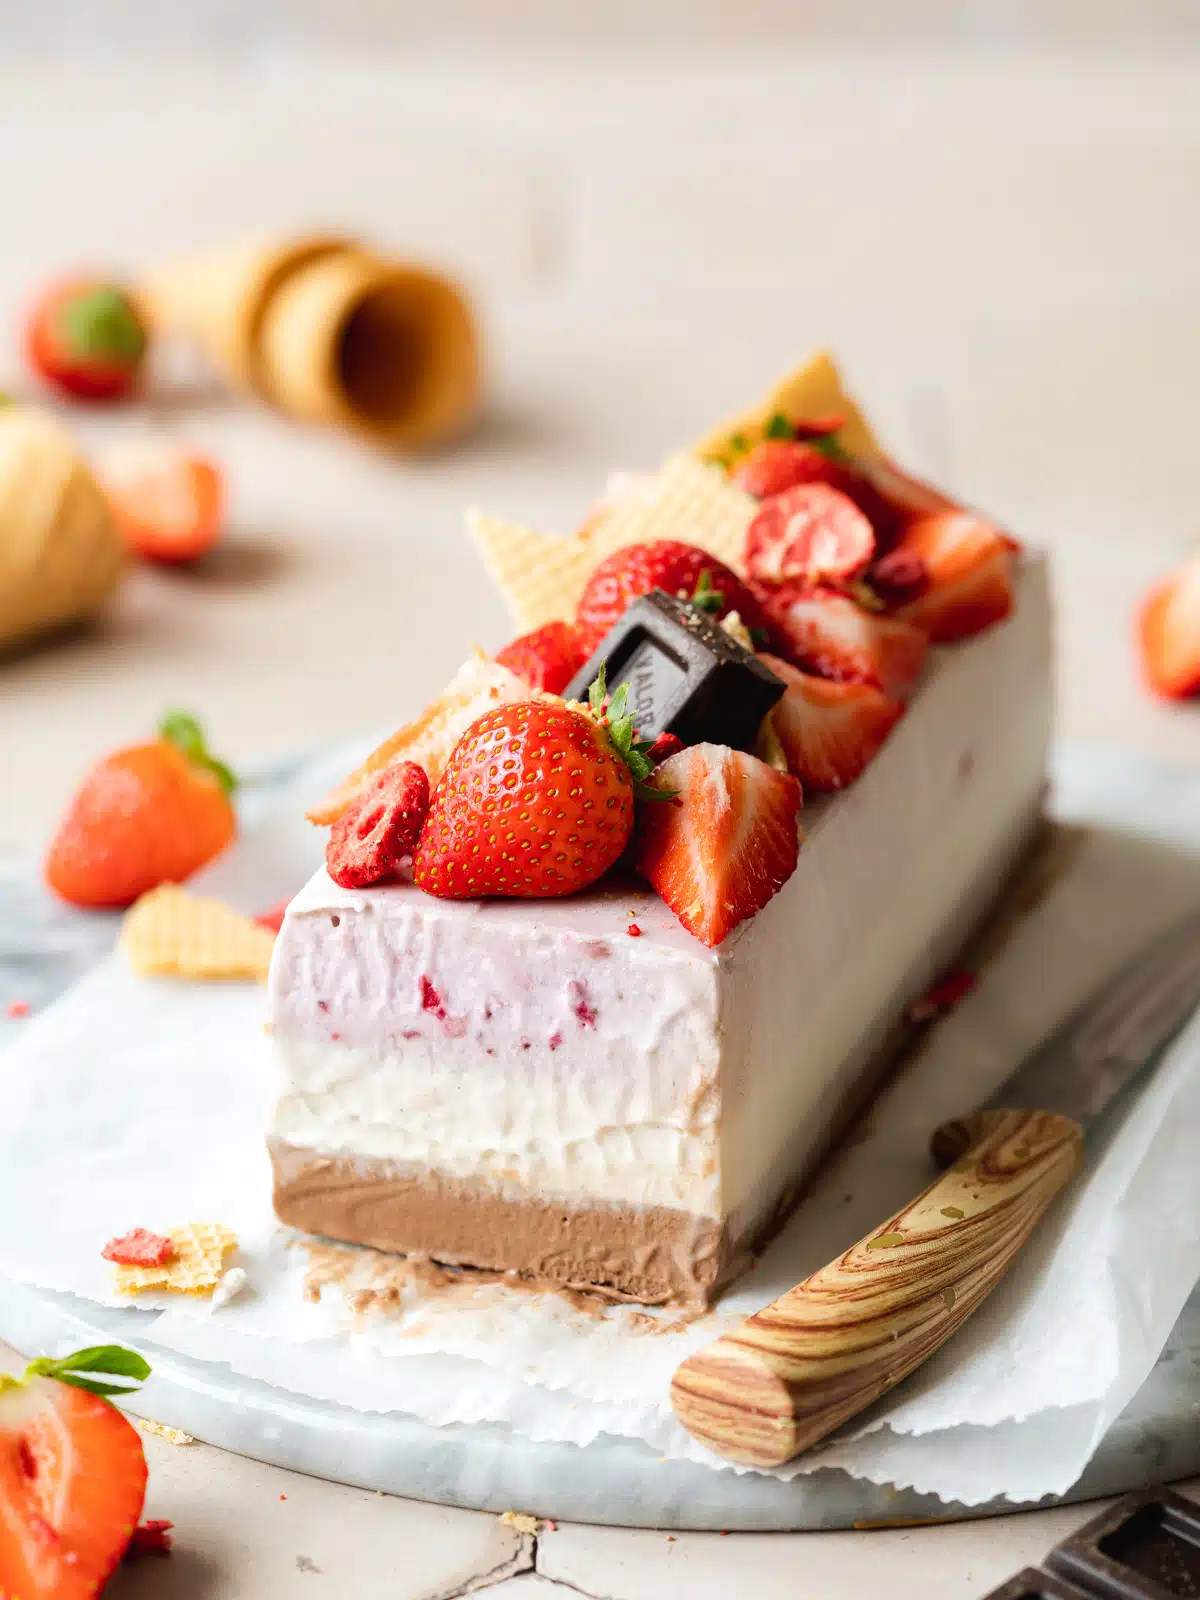 chocolate vanilla strawberry ice cream cake topped with dark chocolate and fresh strawberries on a cutting board.